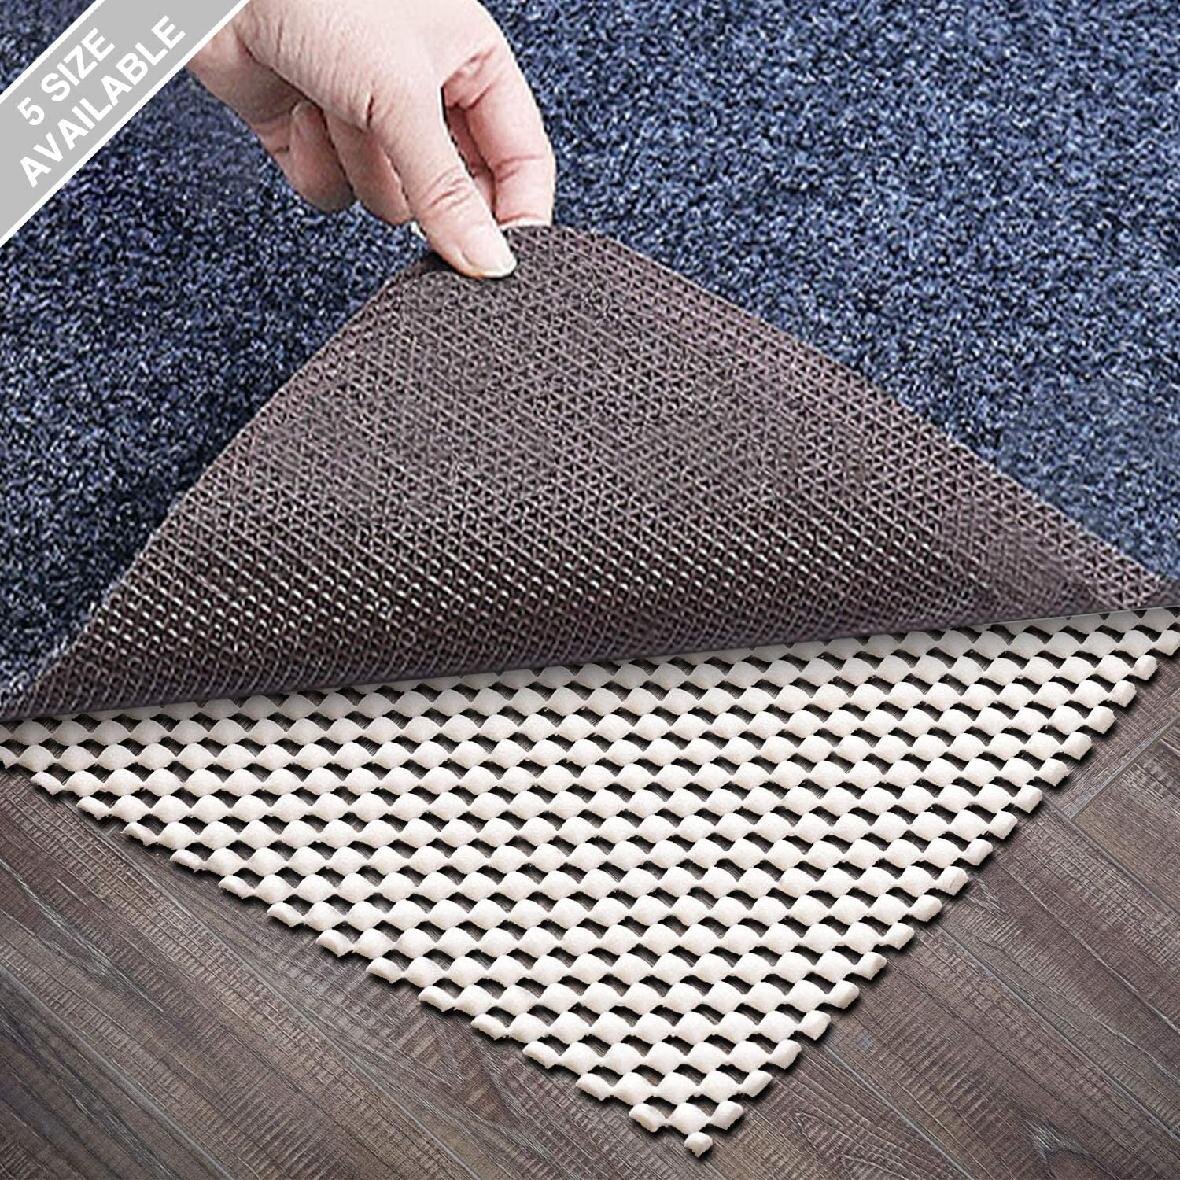 Non-Slip Area Rug Pad 2x3ft Extra Thick Rug Gripper Protective Cushioning Pad 